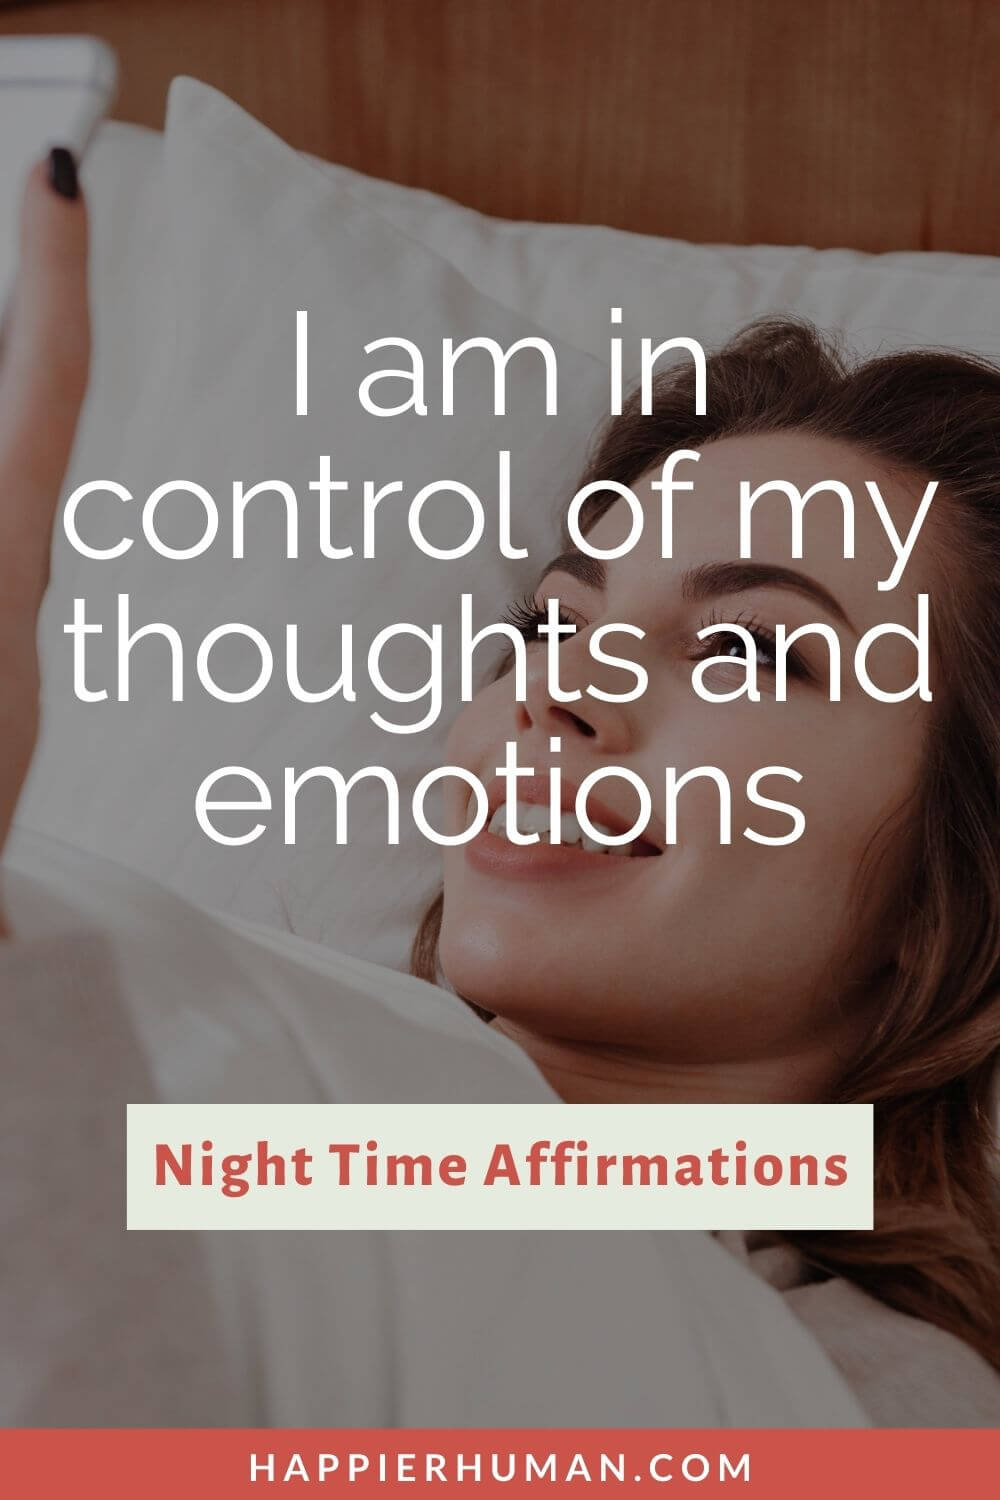 Night Time Affirmations - I am in control of my thoughts and emotions | night time affirmations youtube | bedtime affirmations for confidence | bedtime affirmations for anxiety